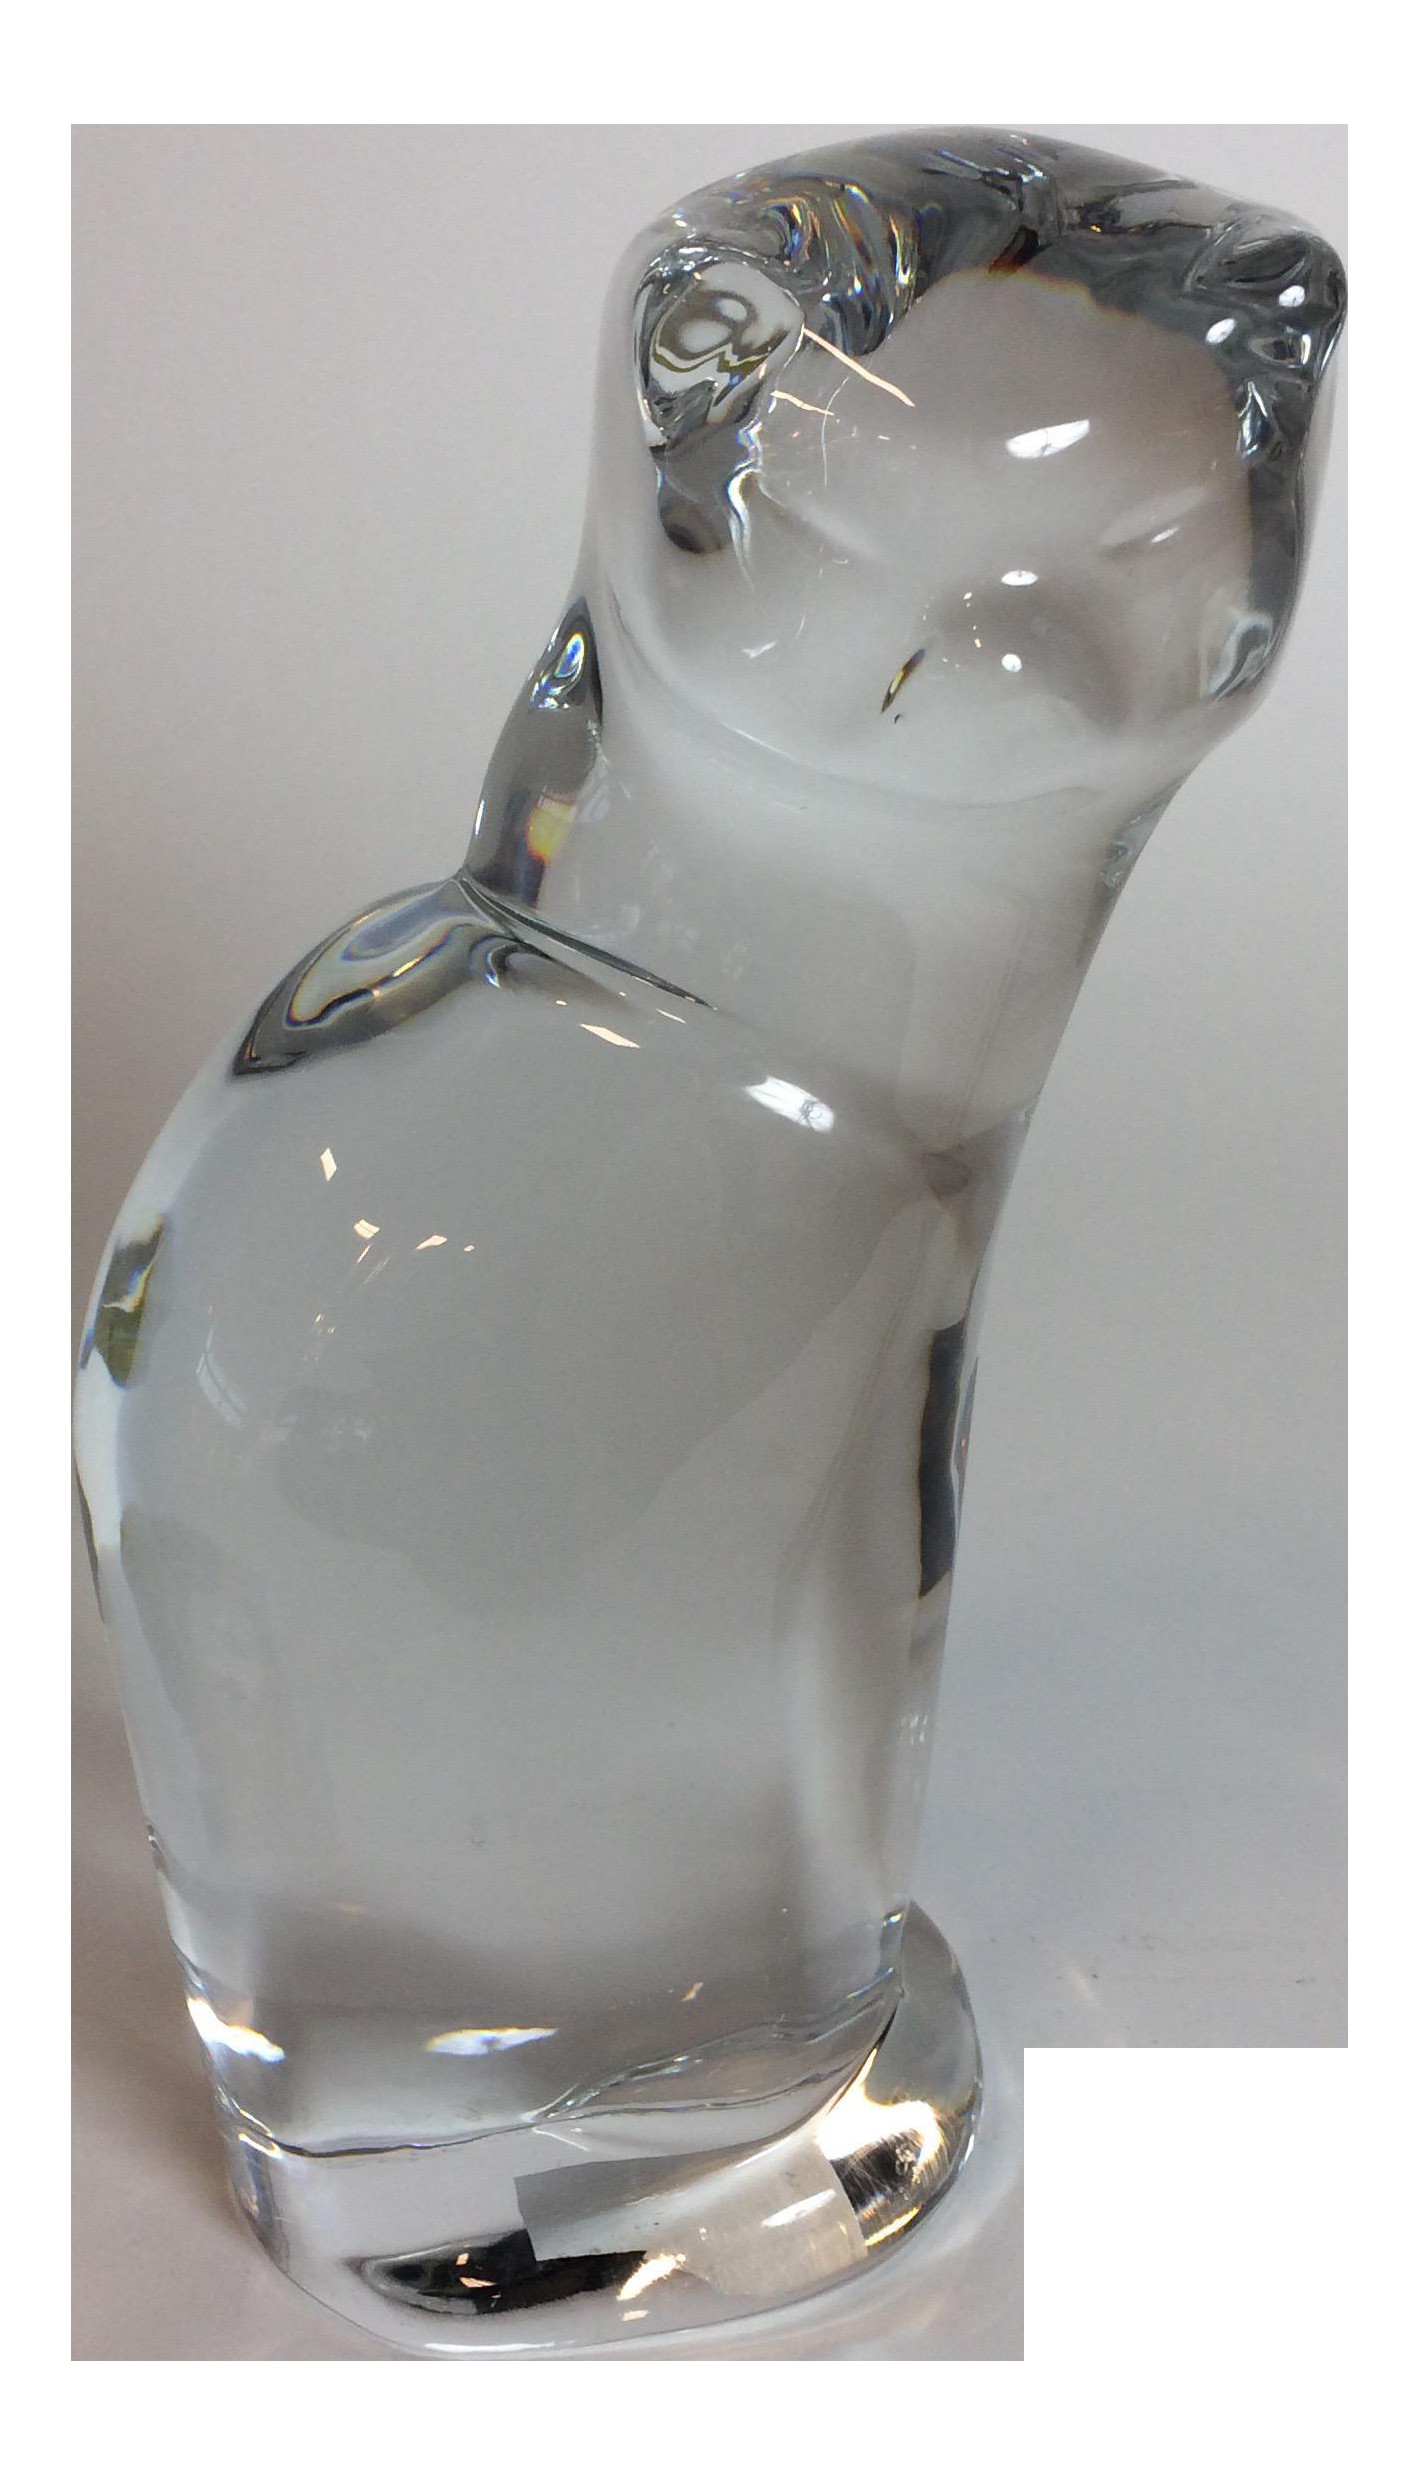 12 Nice orrefors Crystal Bud Vase 2024 free download orrefors crystal bud vase of orrefors glass cat figurine chairish intended for orrefors glass cat figurine 5736